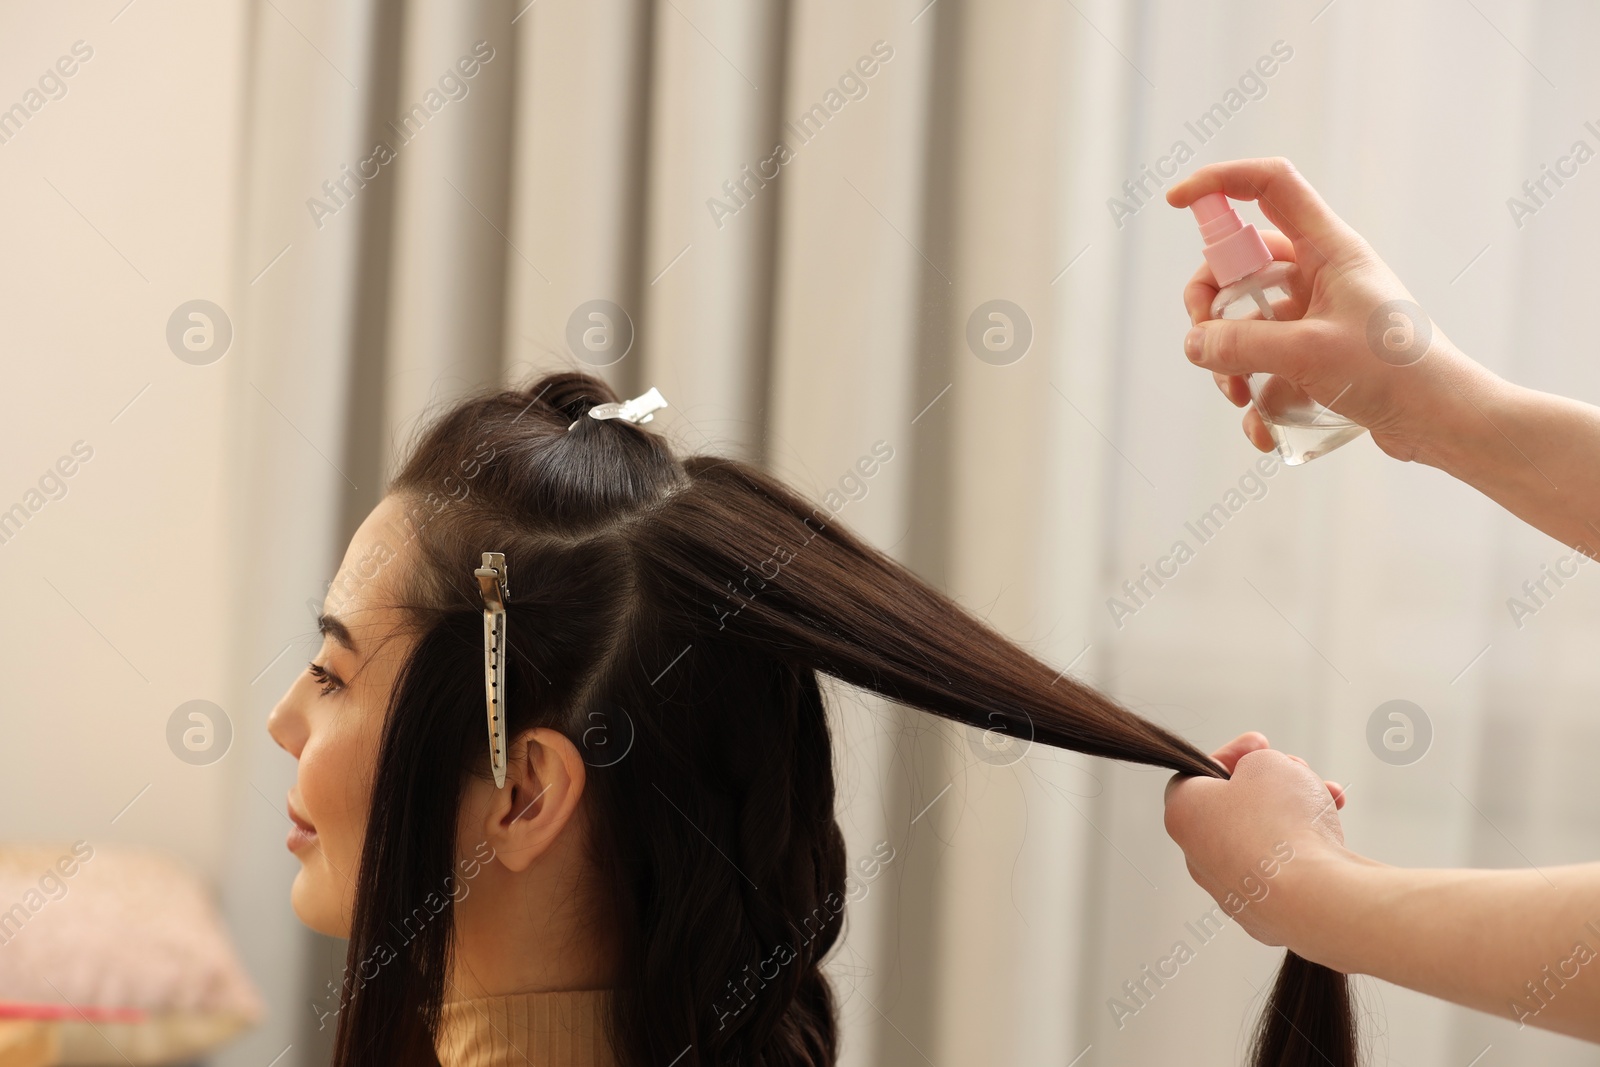 Photo of Hair styling. Professional hairdresser working with client in salon, closeup